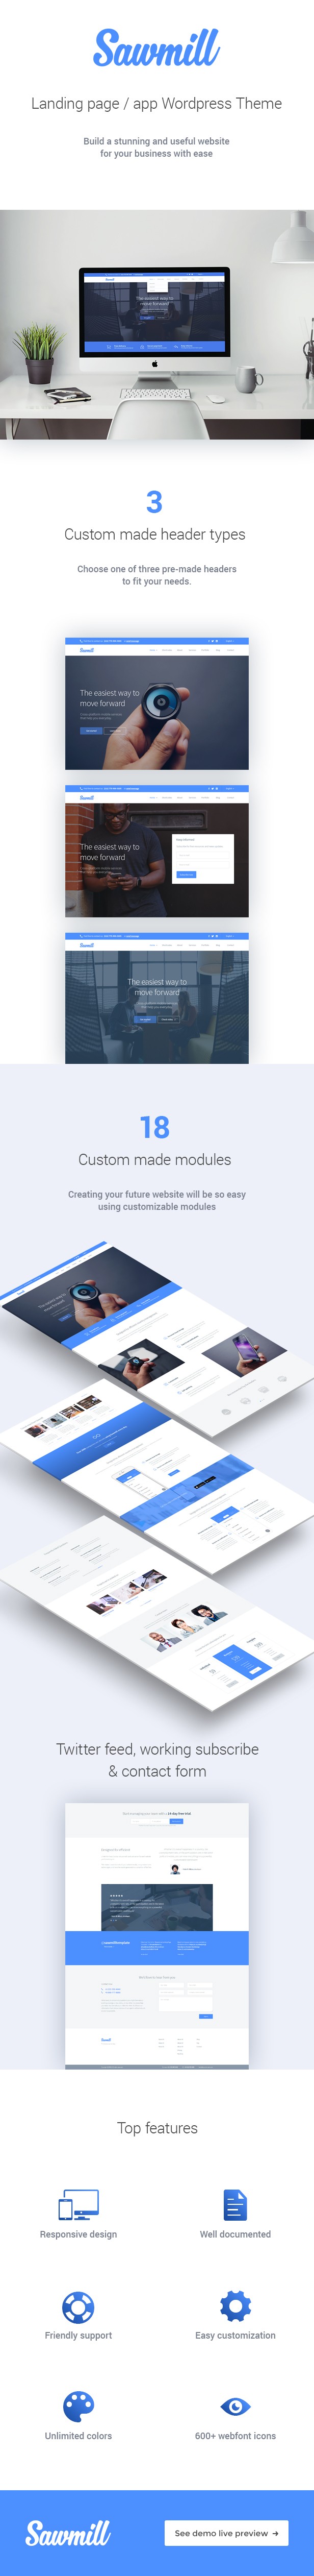 Sawmill - Responsive Landing Page Template